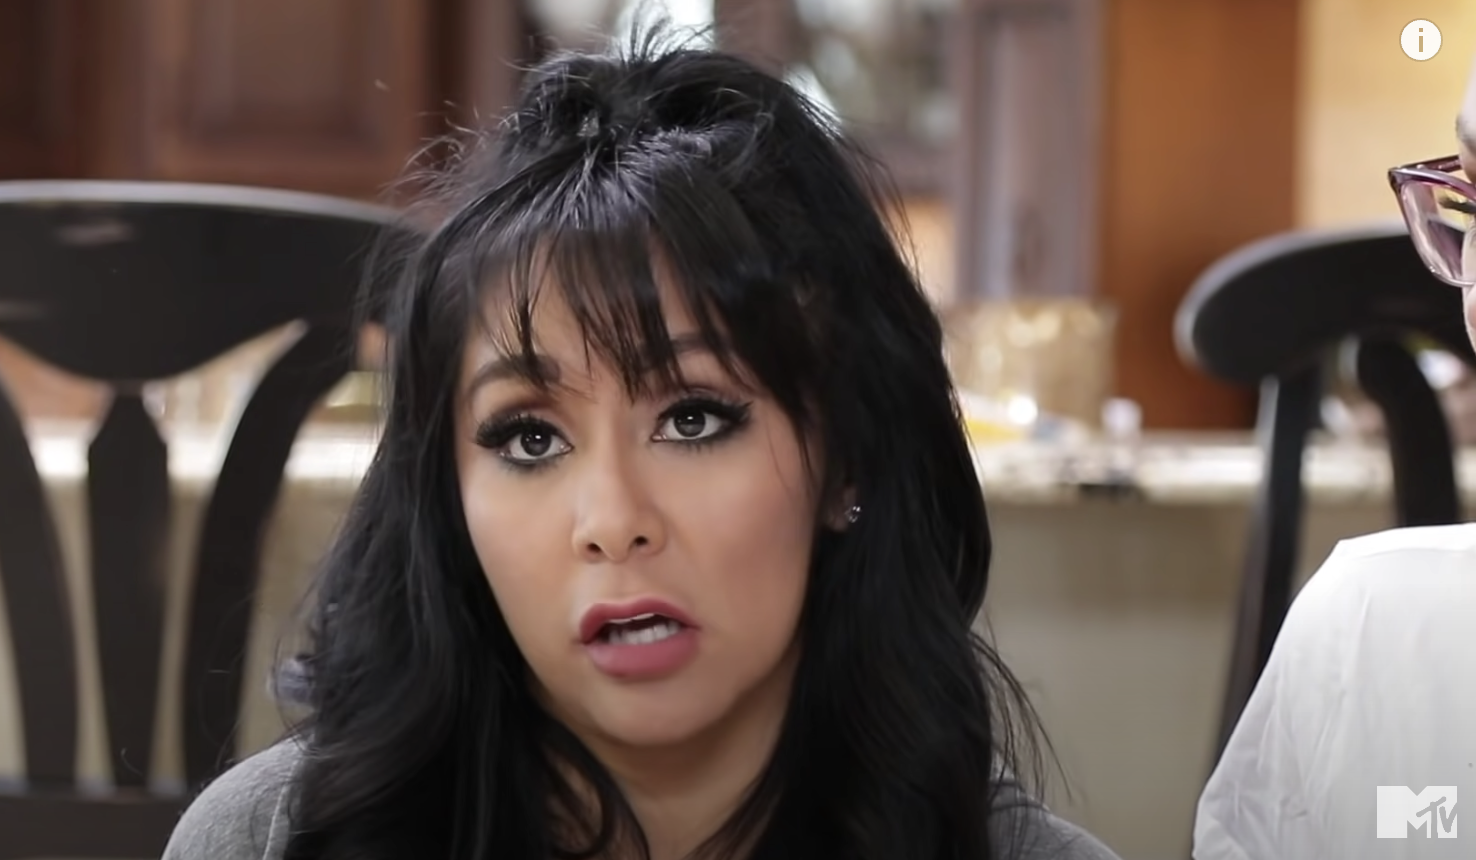 A screenshot of Snooki sitting on a couch and looking into the camera while talking